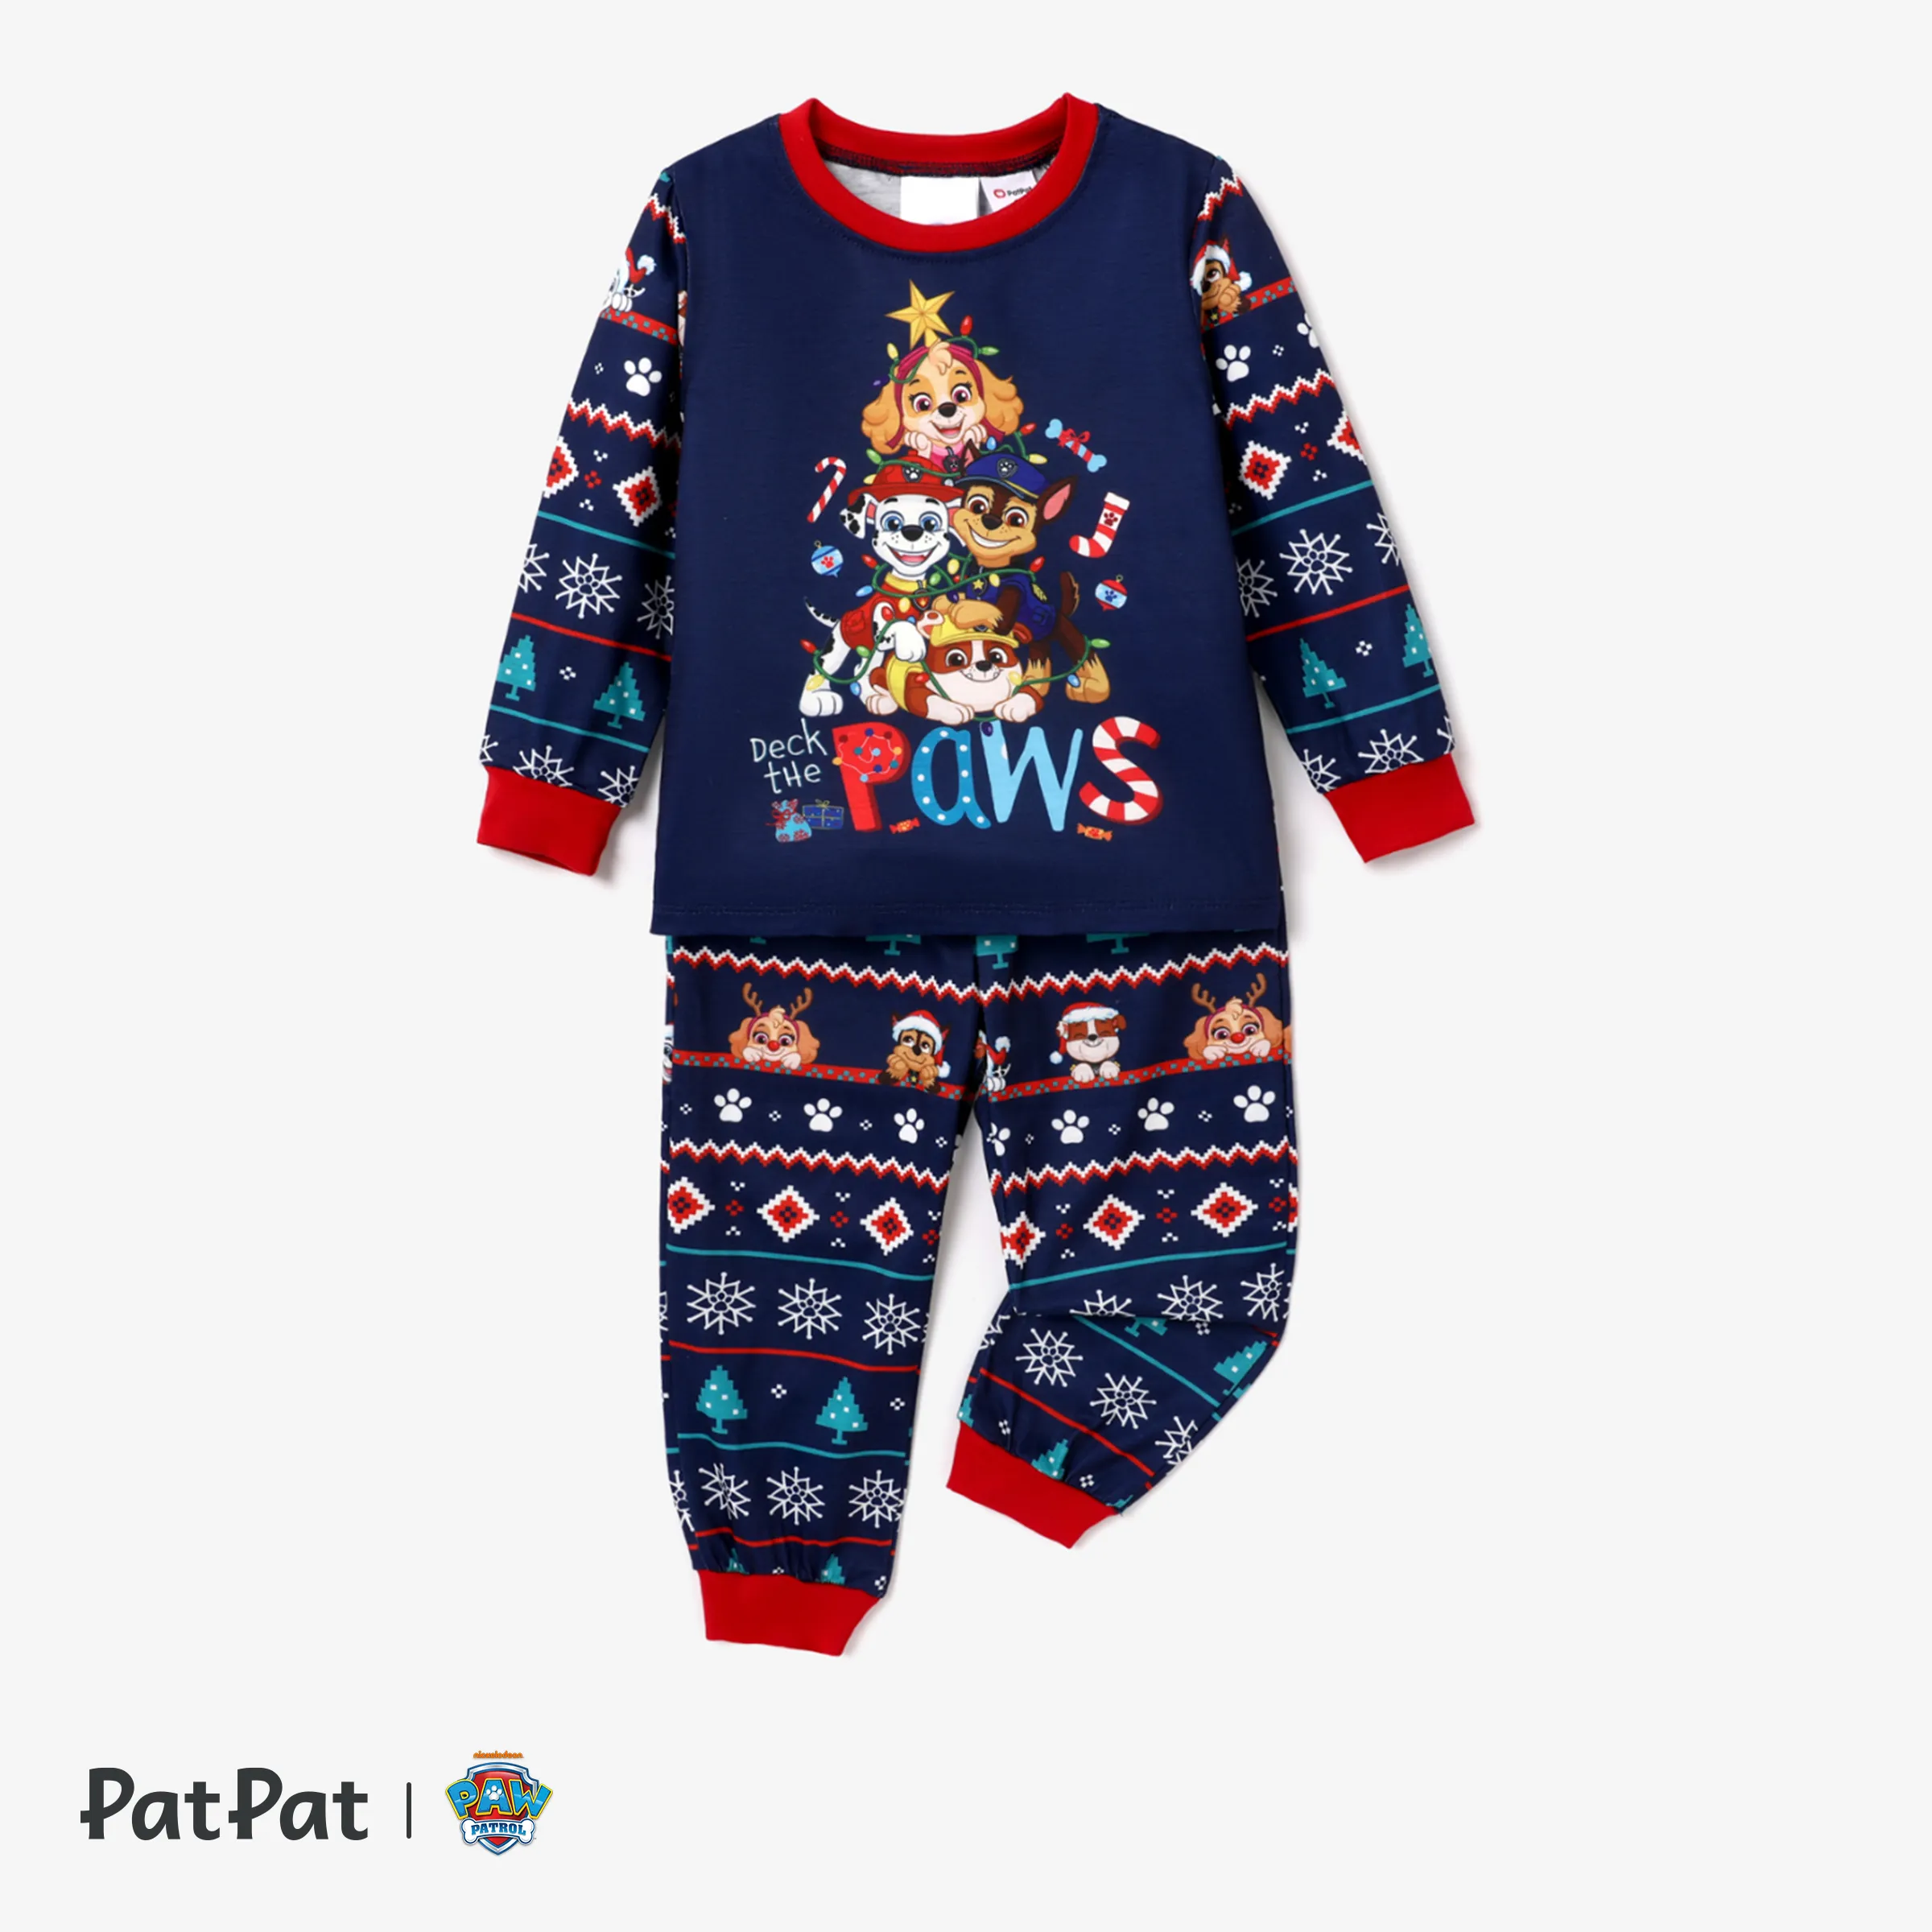 

PAW Patrol Christmas Family Matching Character Allover Print Long-sleeve Pajamas Sets(Flame Resistant)